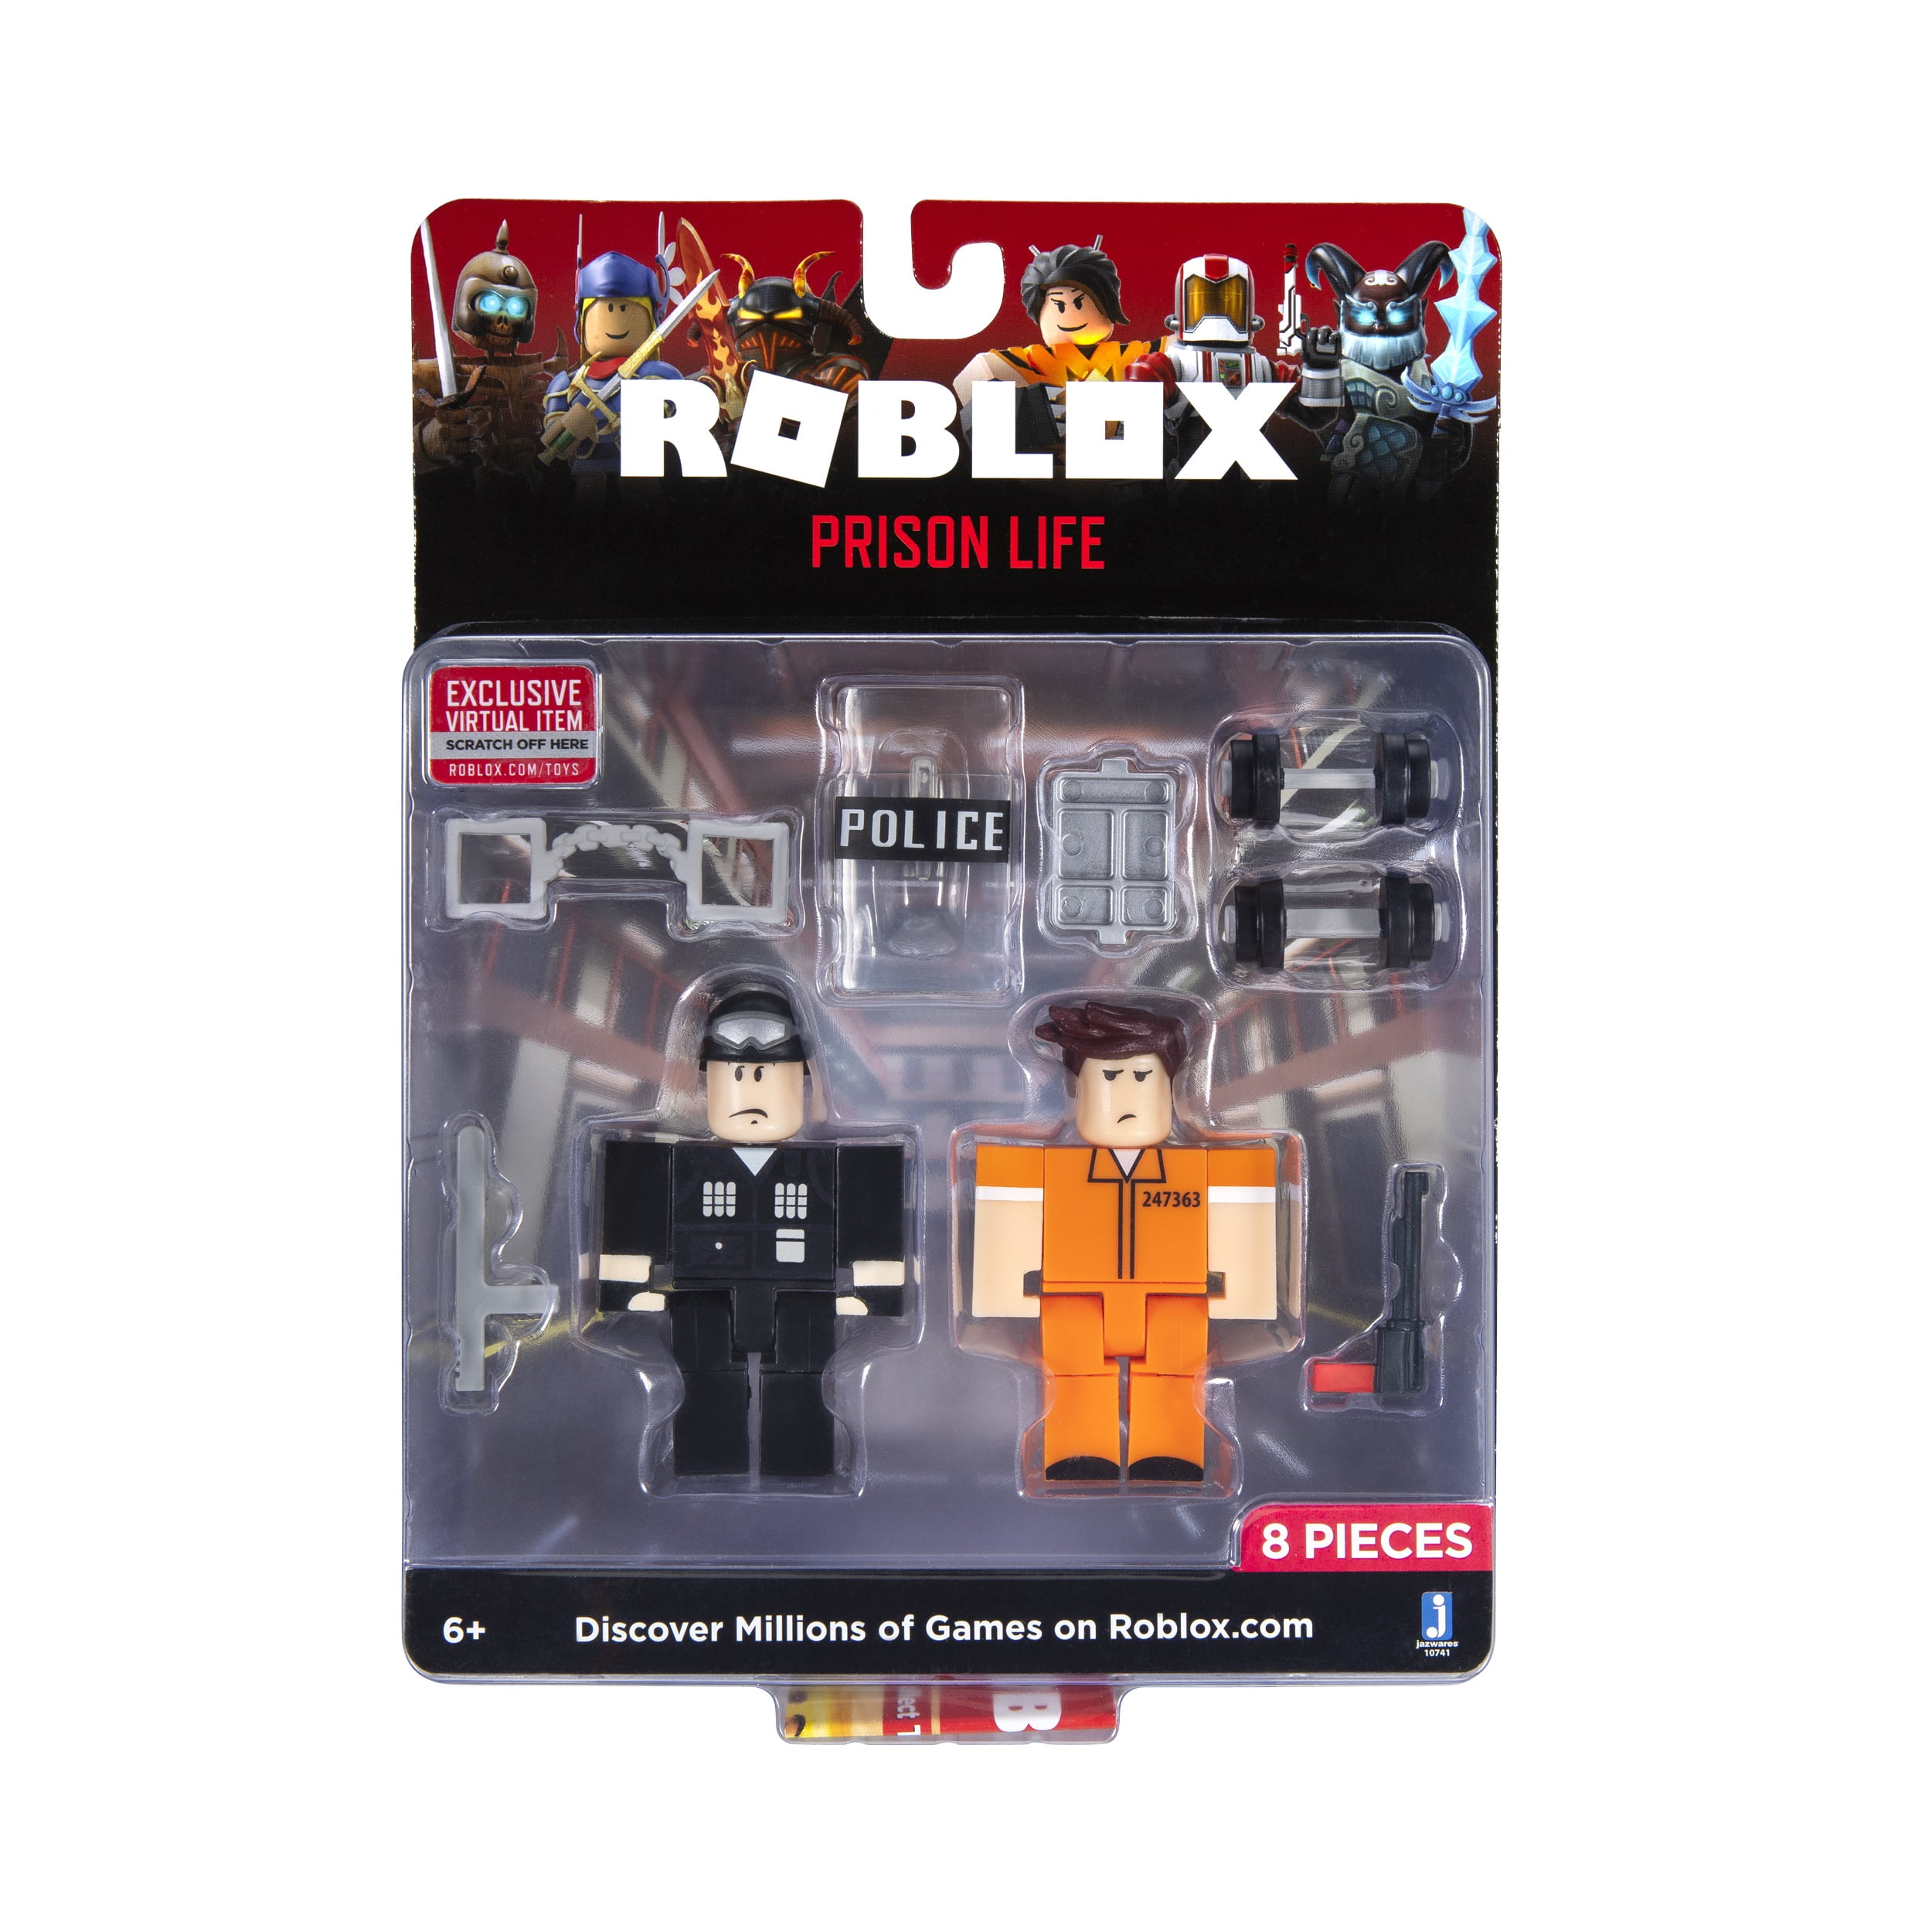 Roblox Action Collection - Prison Life Game Pack [Includes Exclusive  Virtual Item] 